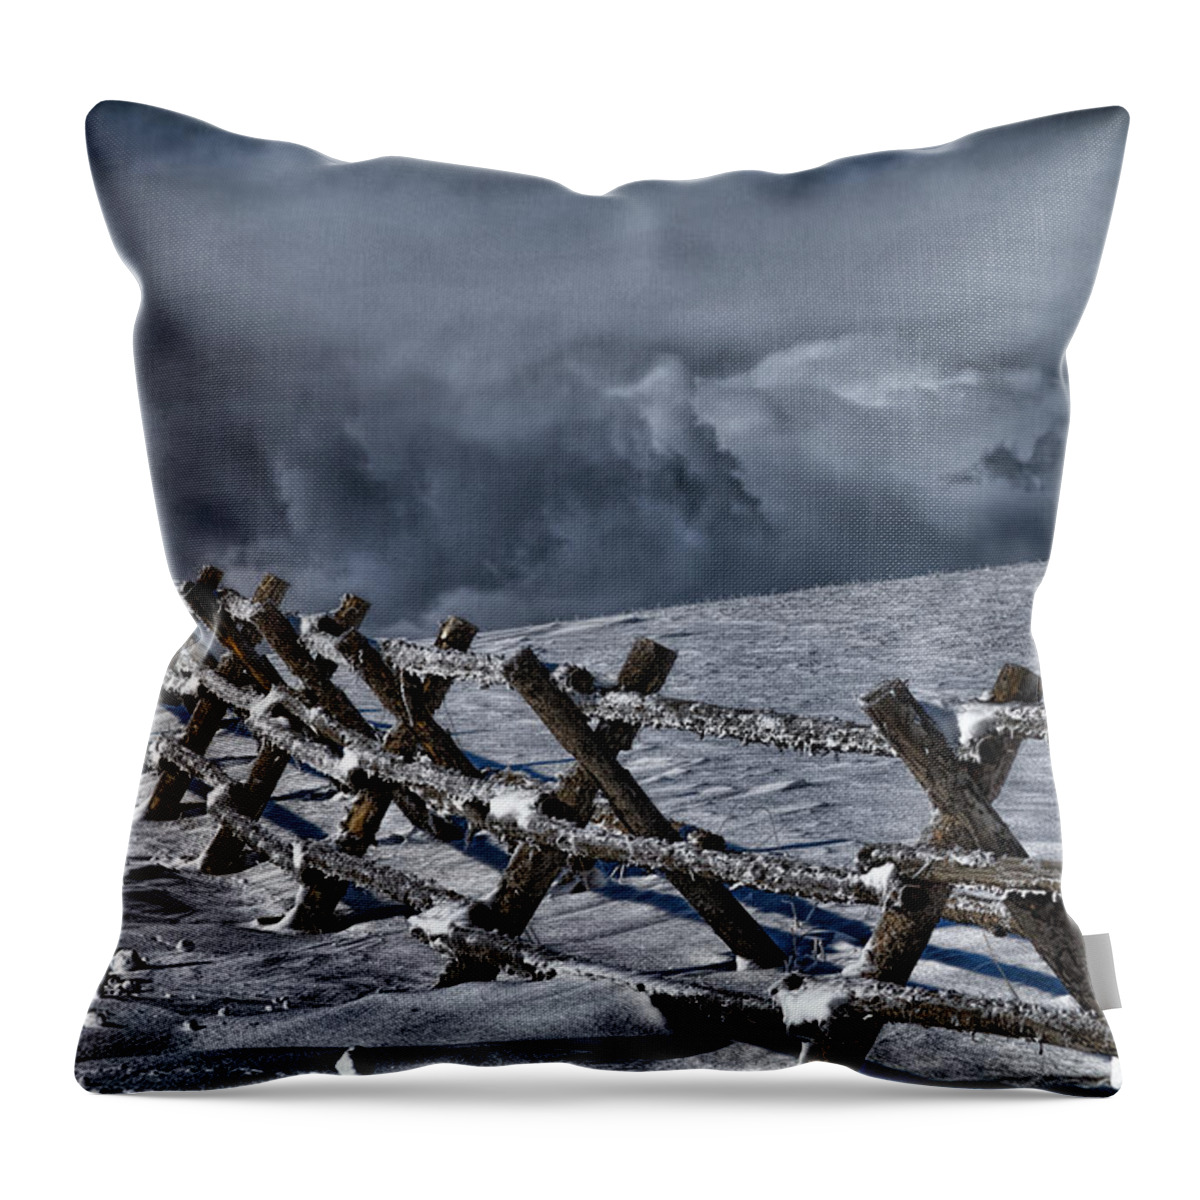 Landscape Throw Pillow featuring the photograph Holding Back the Storm by Alana Thrower